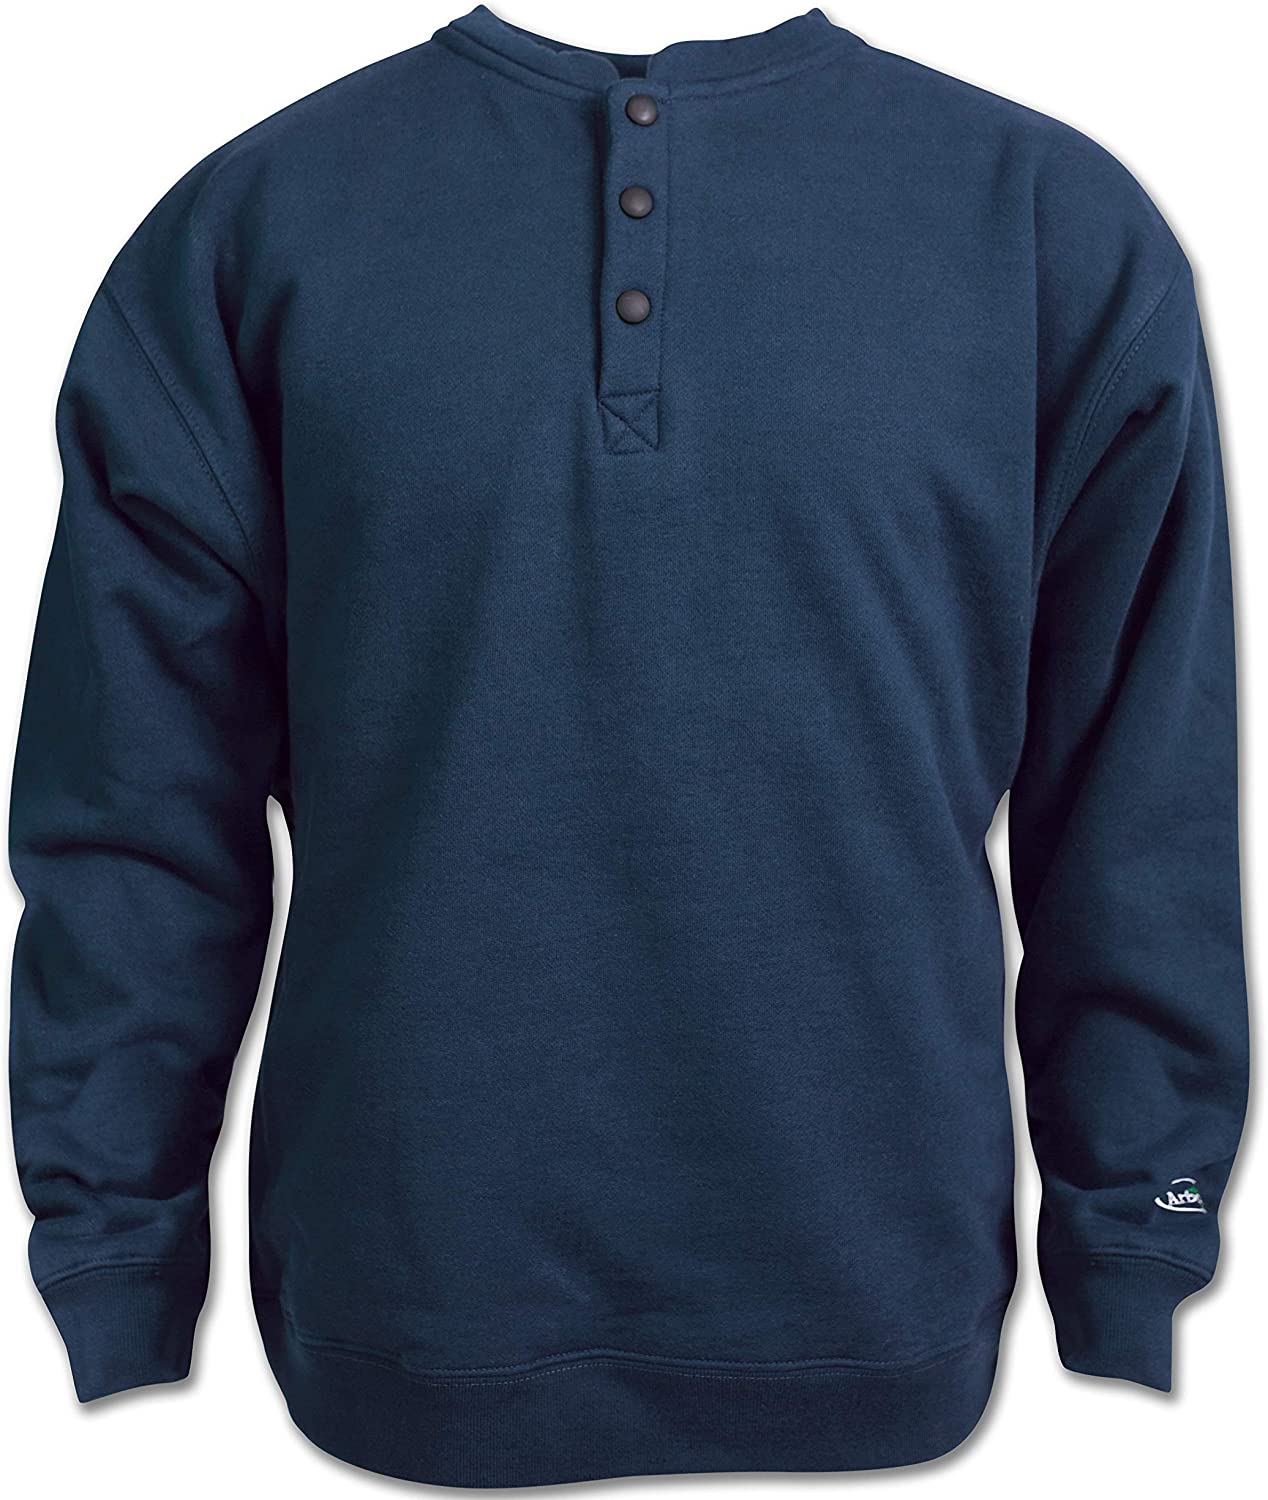 Arborwear Men's Single Thick Crew Sweatshirt in Navy from the from